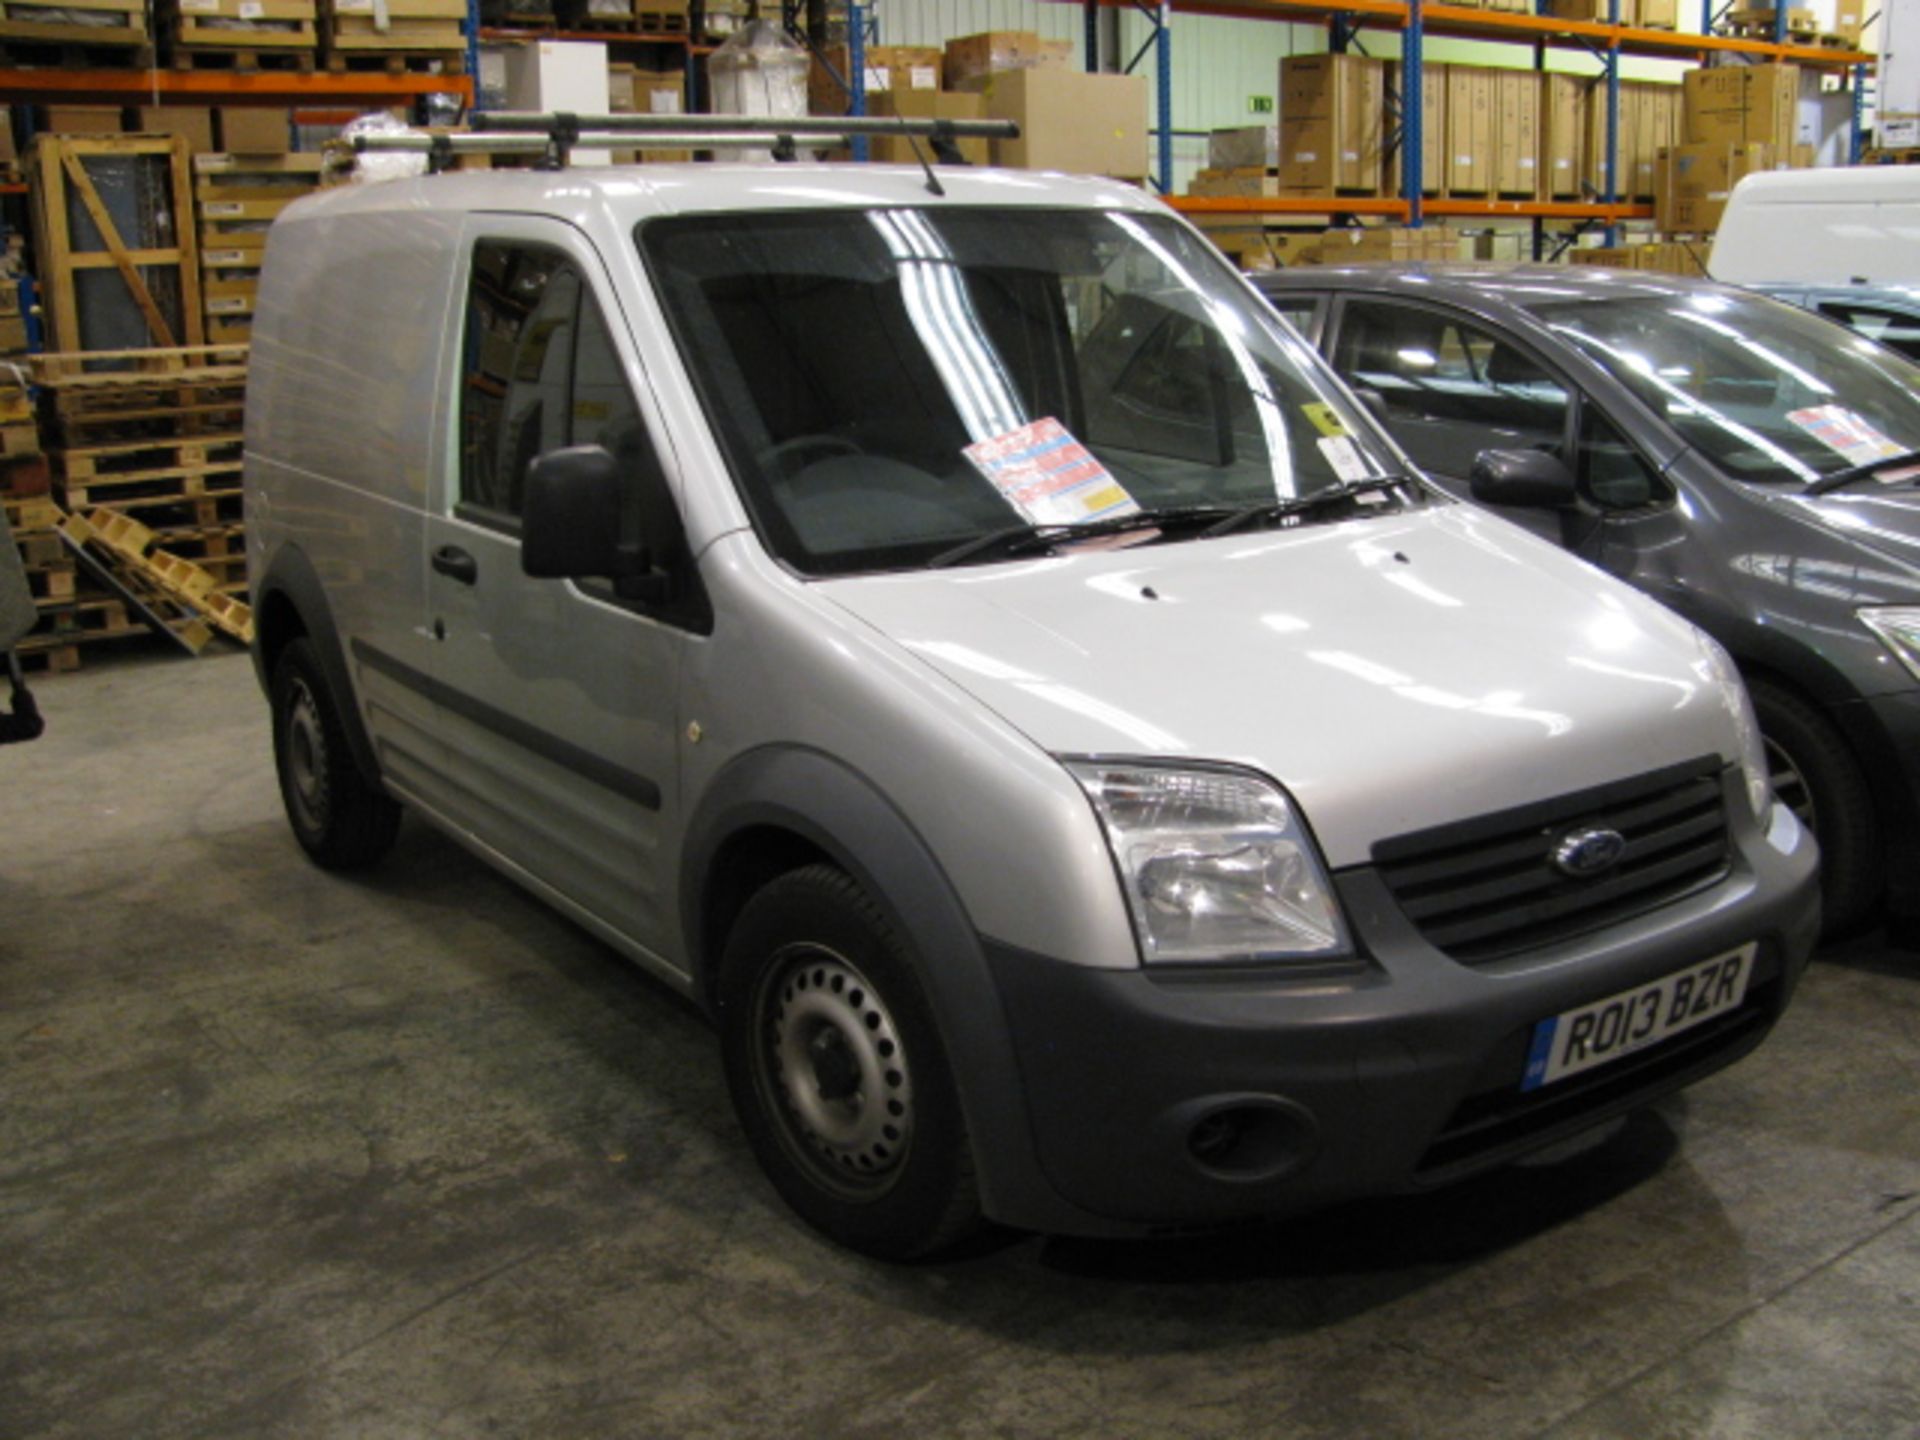 Ford transit connect 90T 200 swb panel Van, reg RO13 BZR, mileage 41739 approx - Image 2 of 4